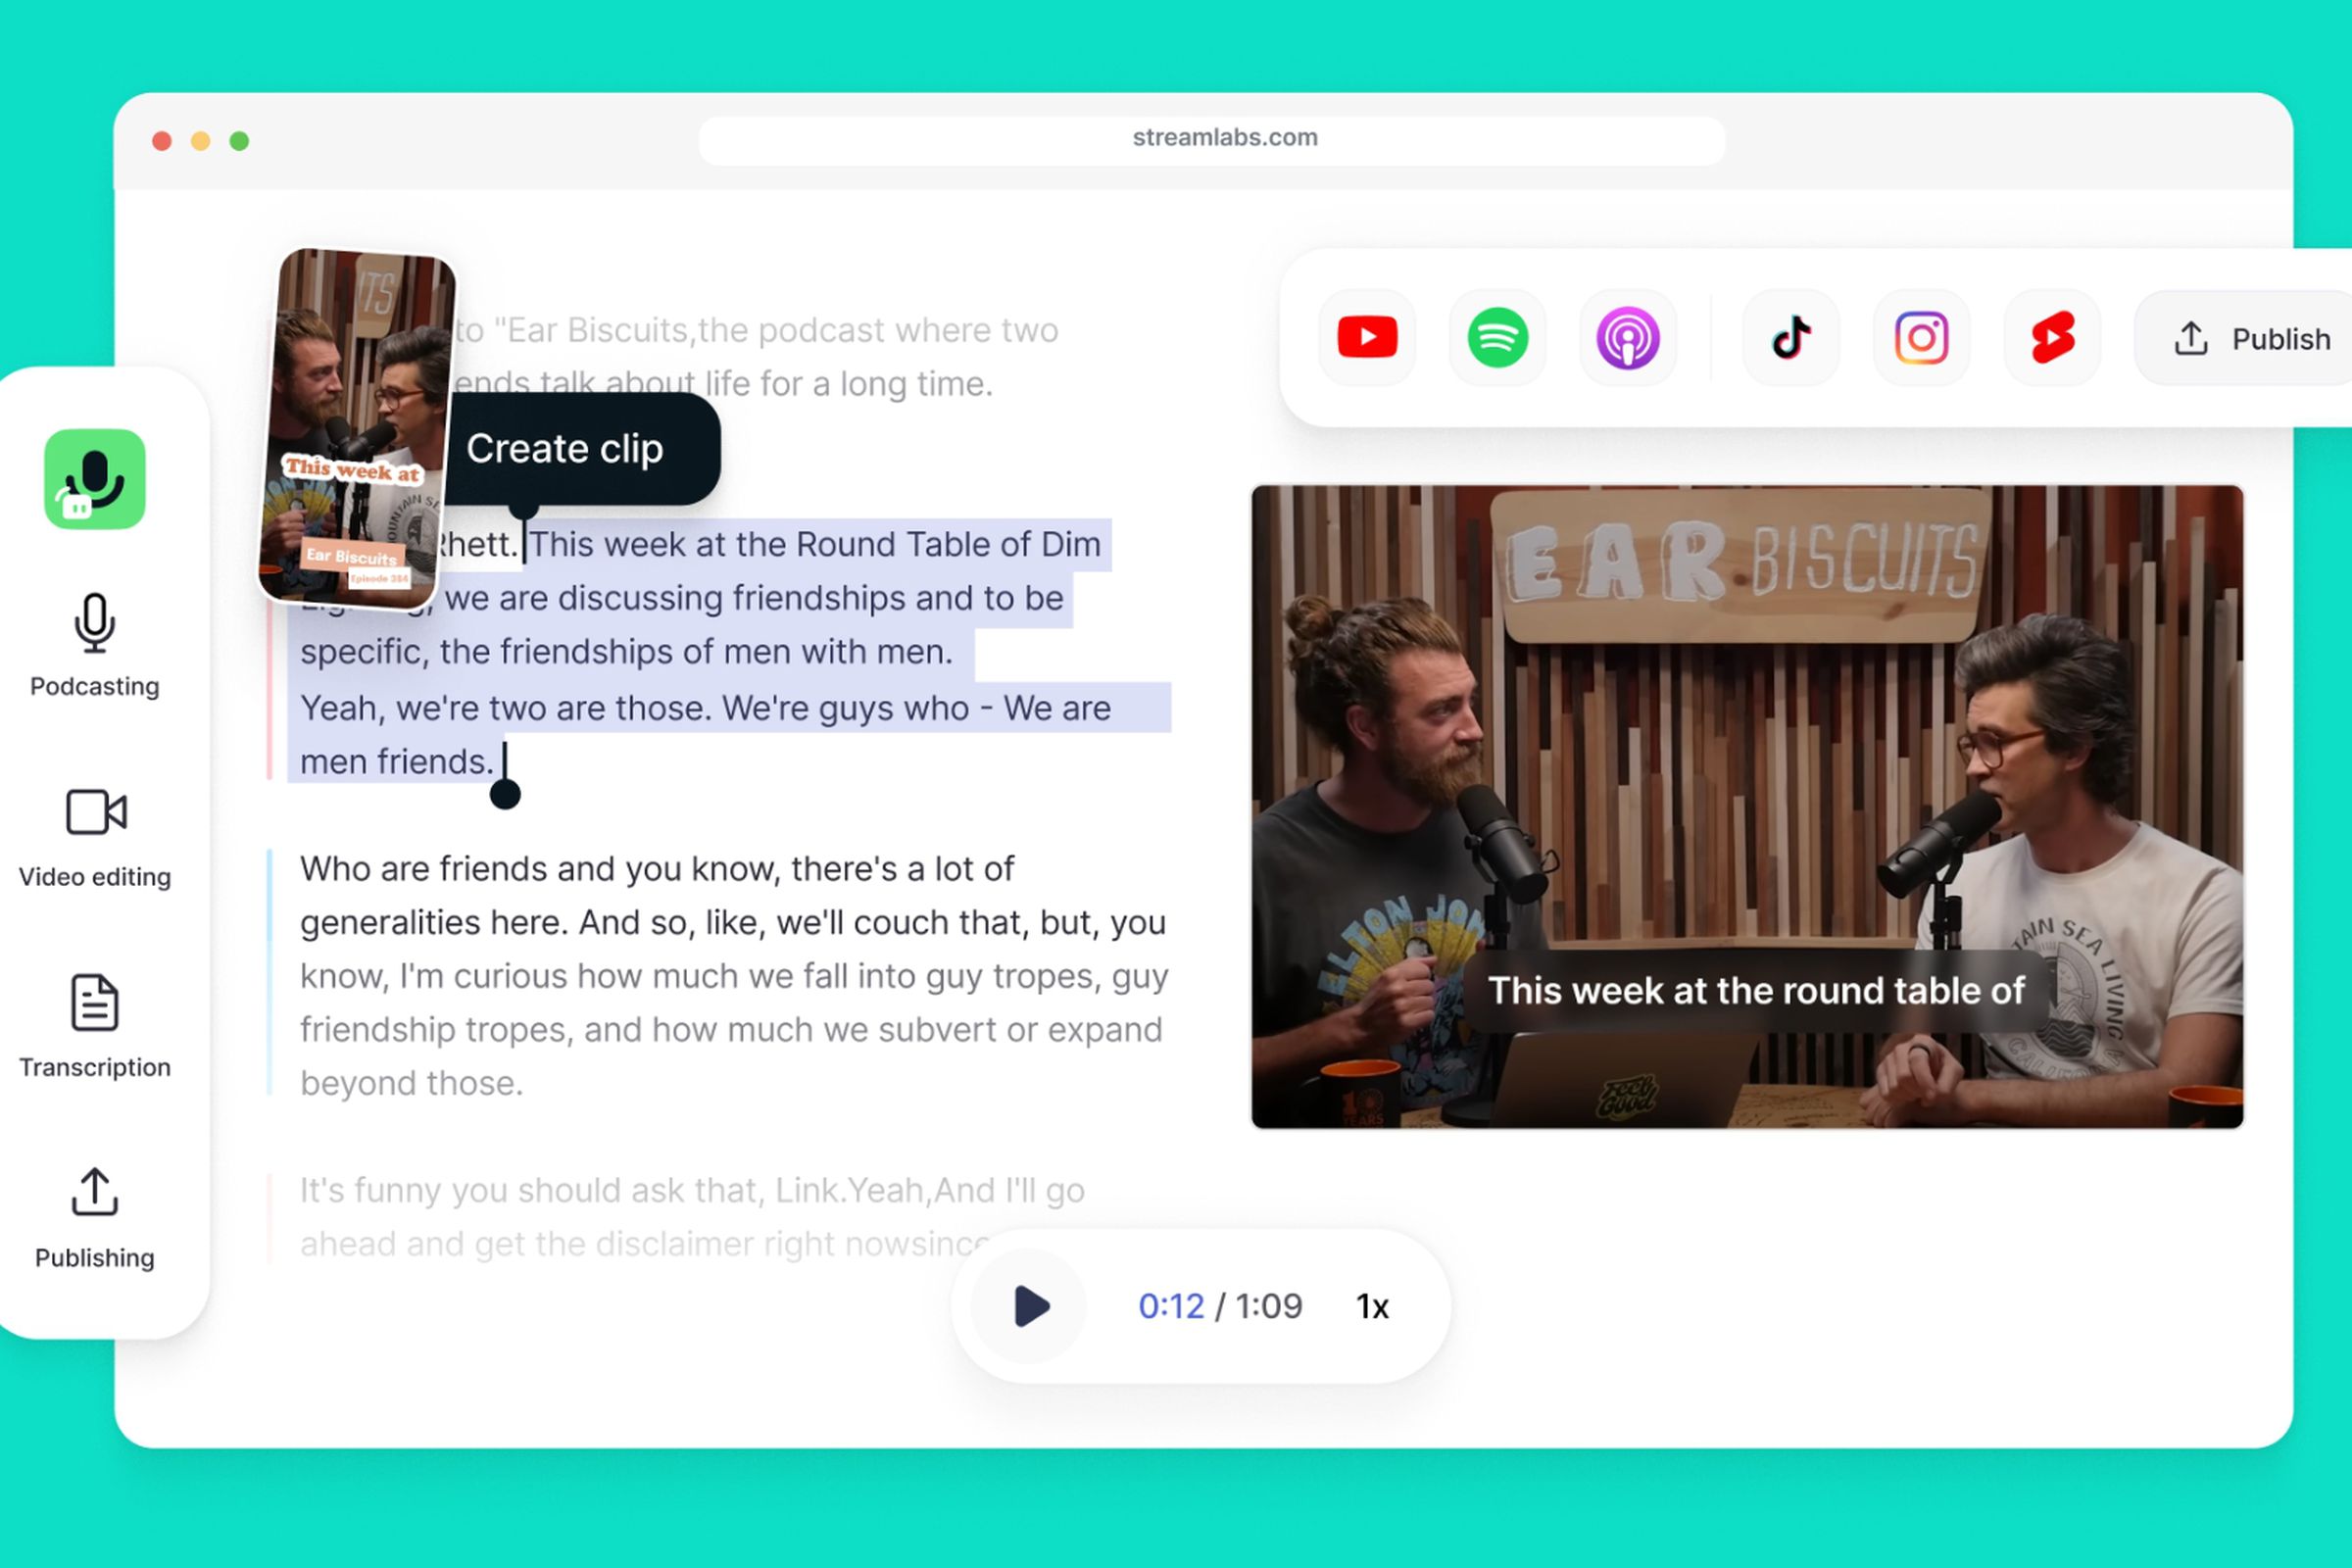 A mock-up of YouTube creators Rhett and Link using Streamlabs’ new Podcast Editor to transcribe and edit clips